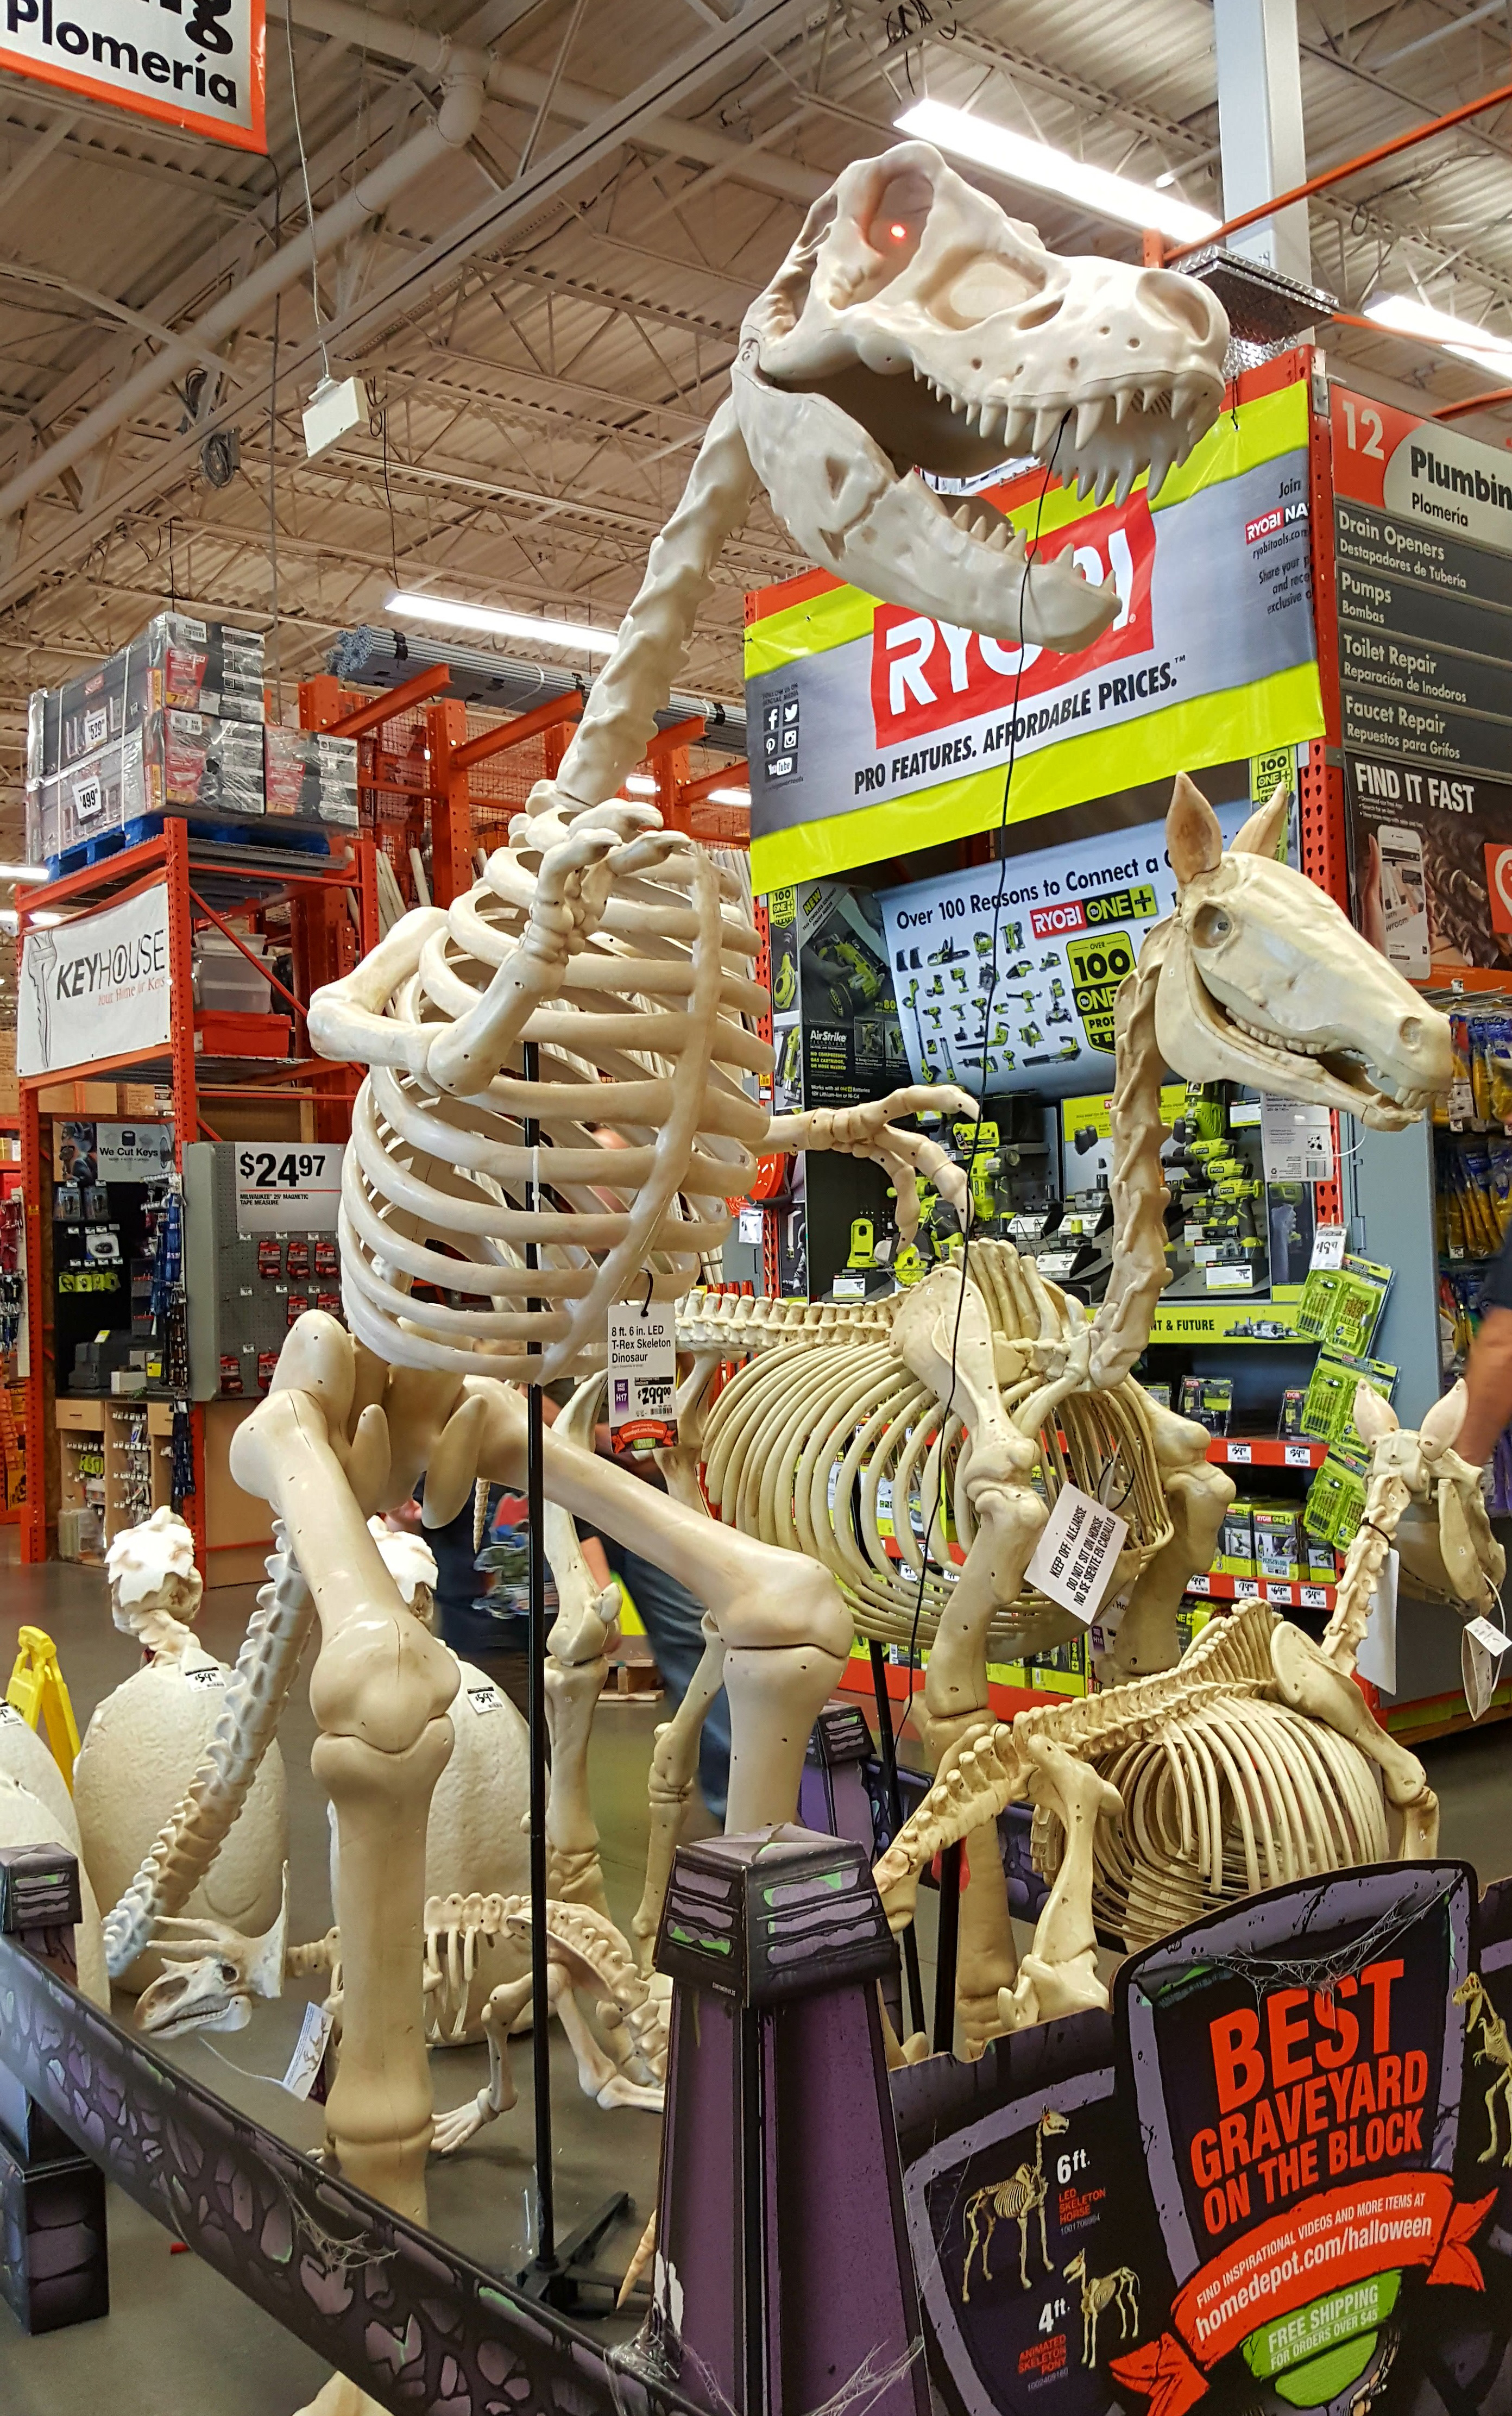 Halloween decorations fill the isles of the stores. 